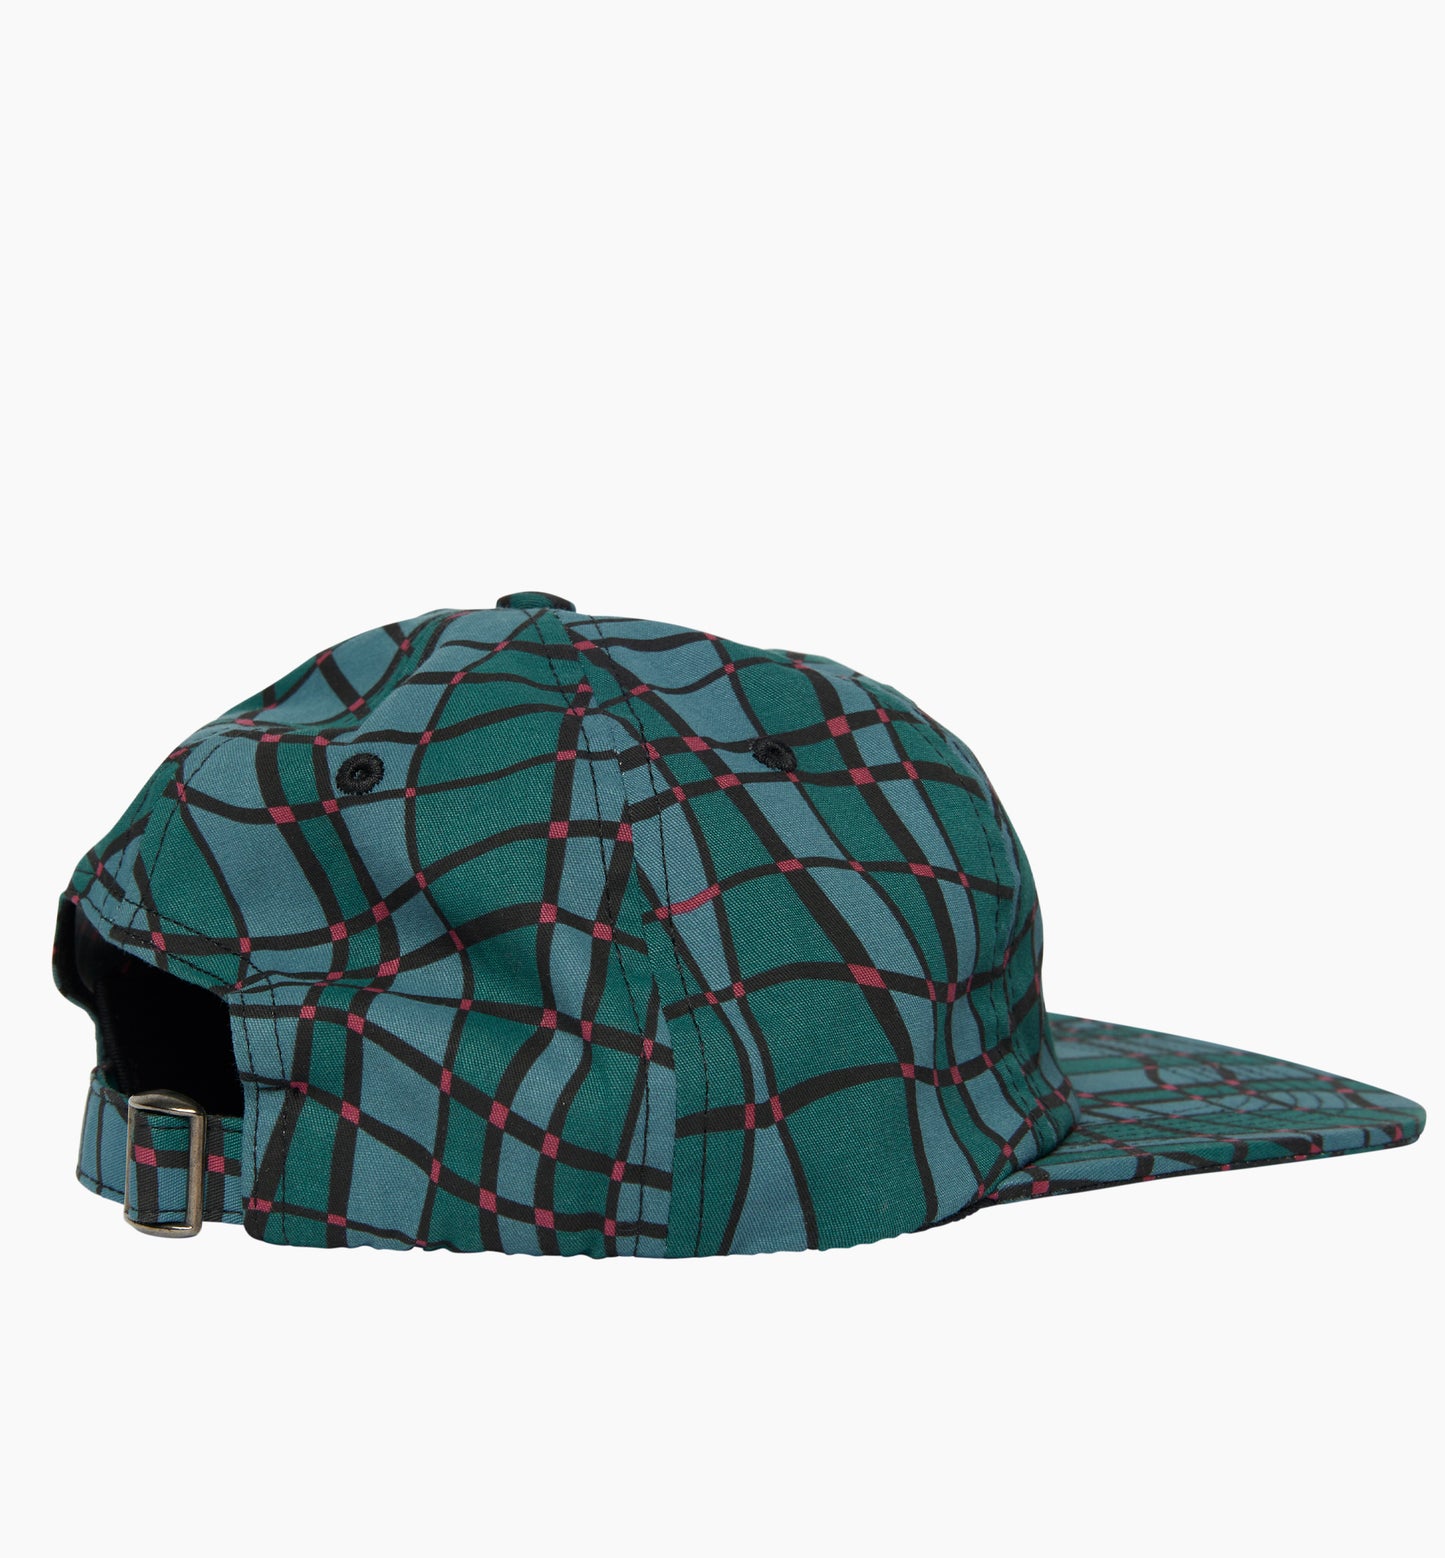 By Parra Squared Waves Pattern 6 Panel Hat